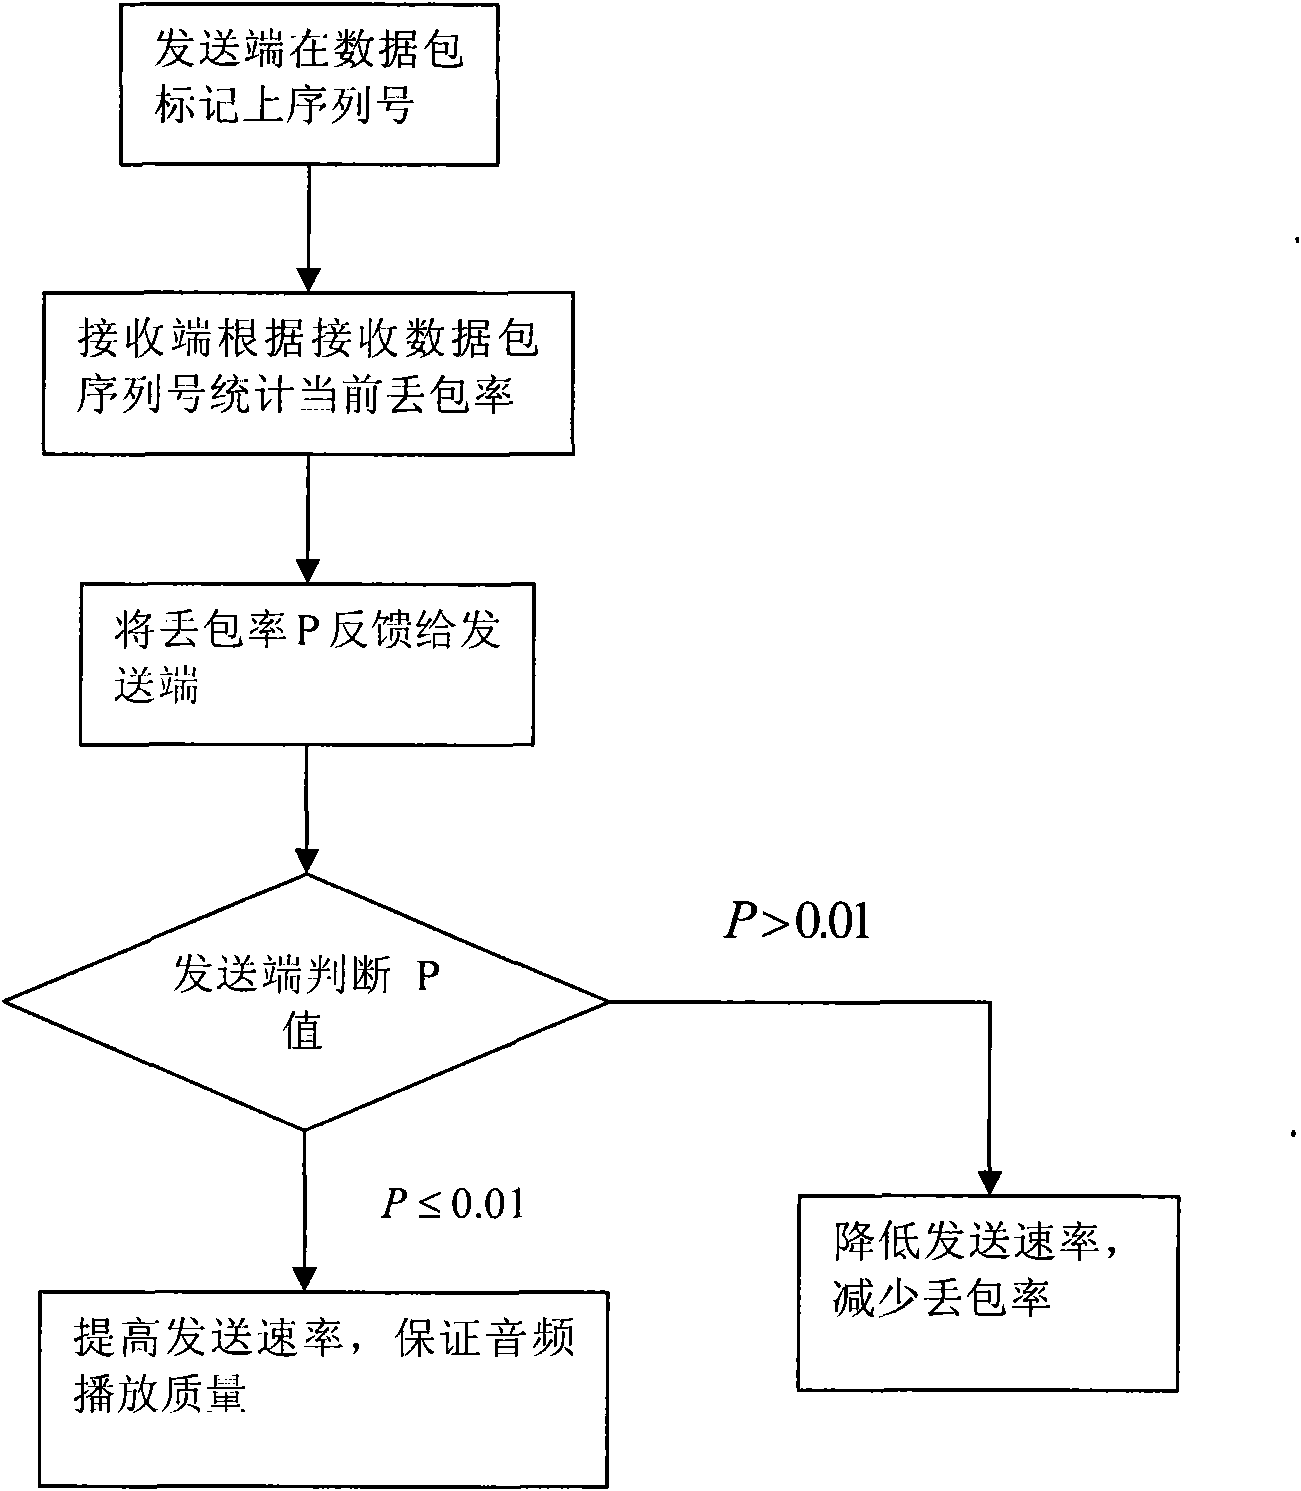 Novel sound system and method for downloading music through network